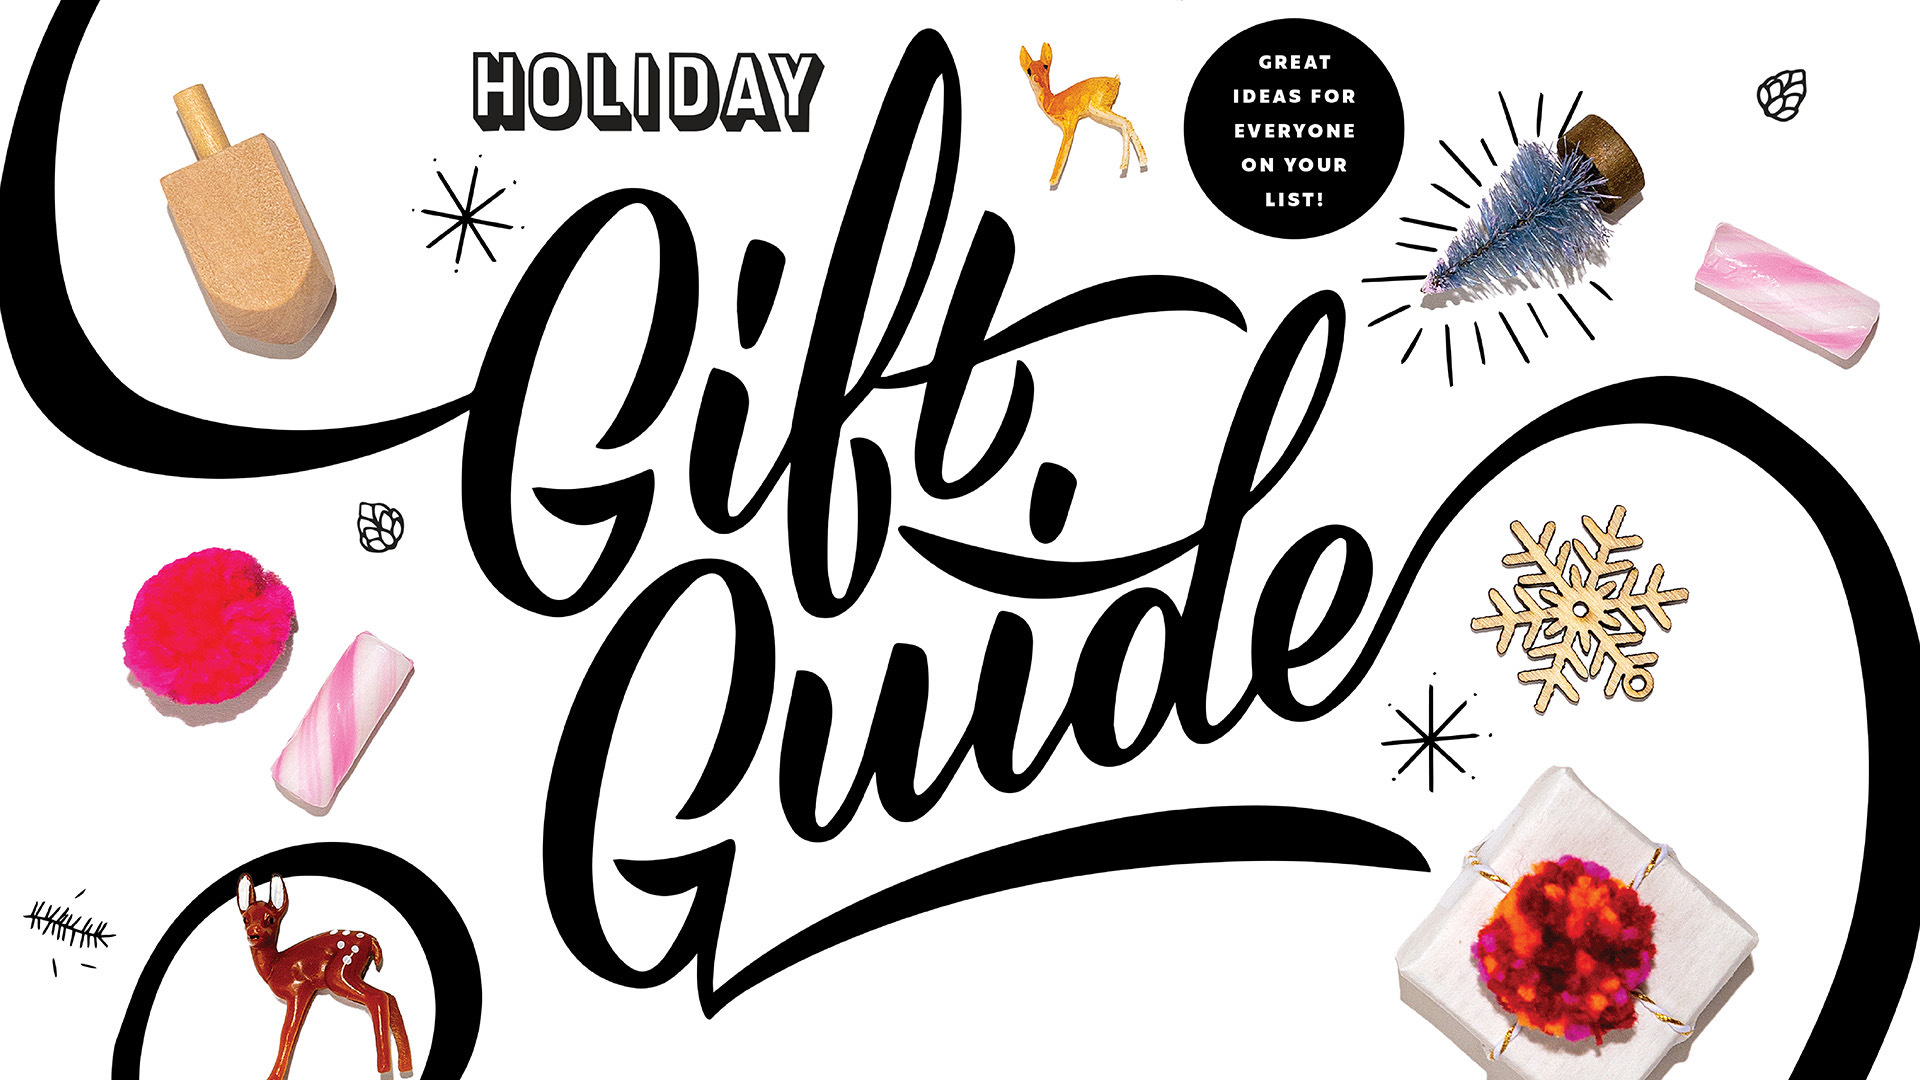 2020 Holiday Gift Guide: Great ideas for everyone on you list!